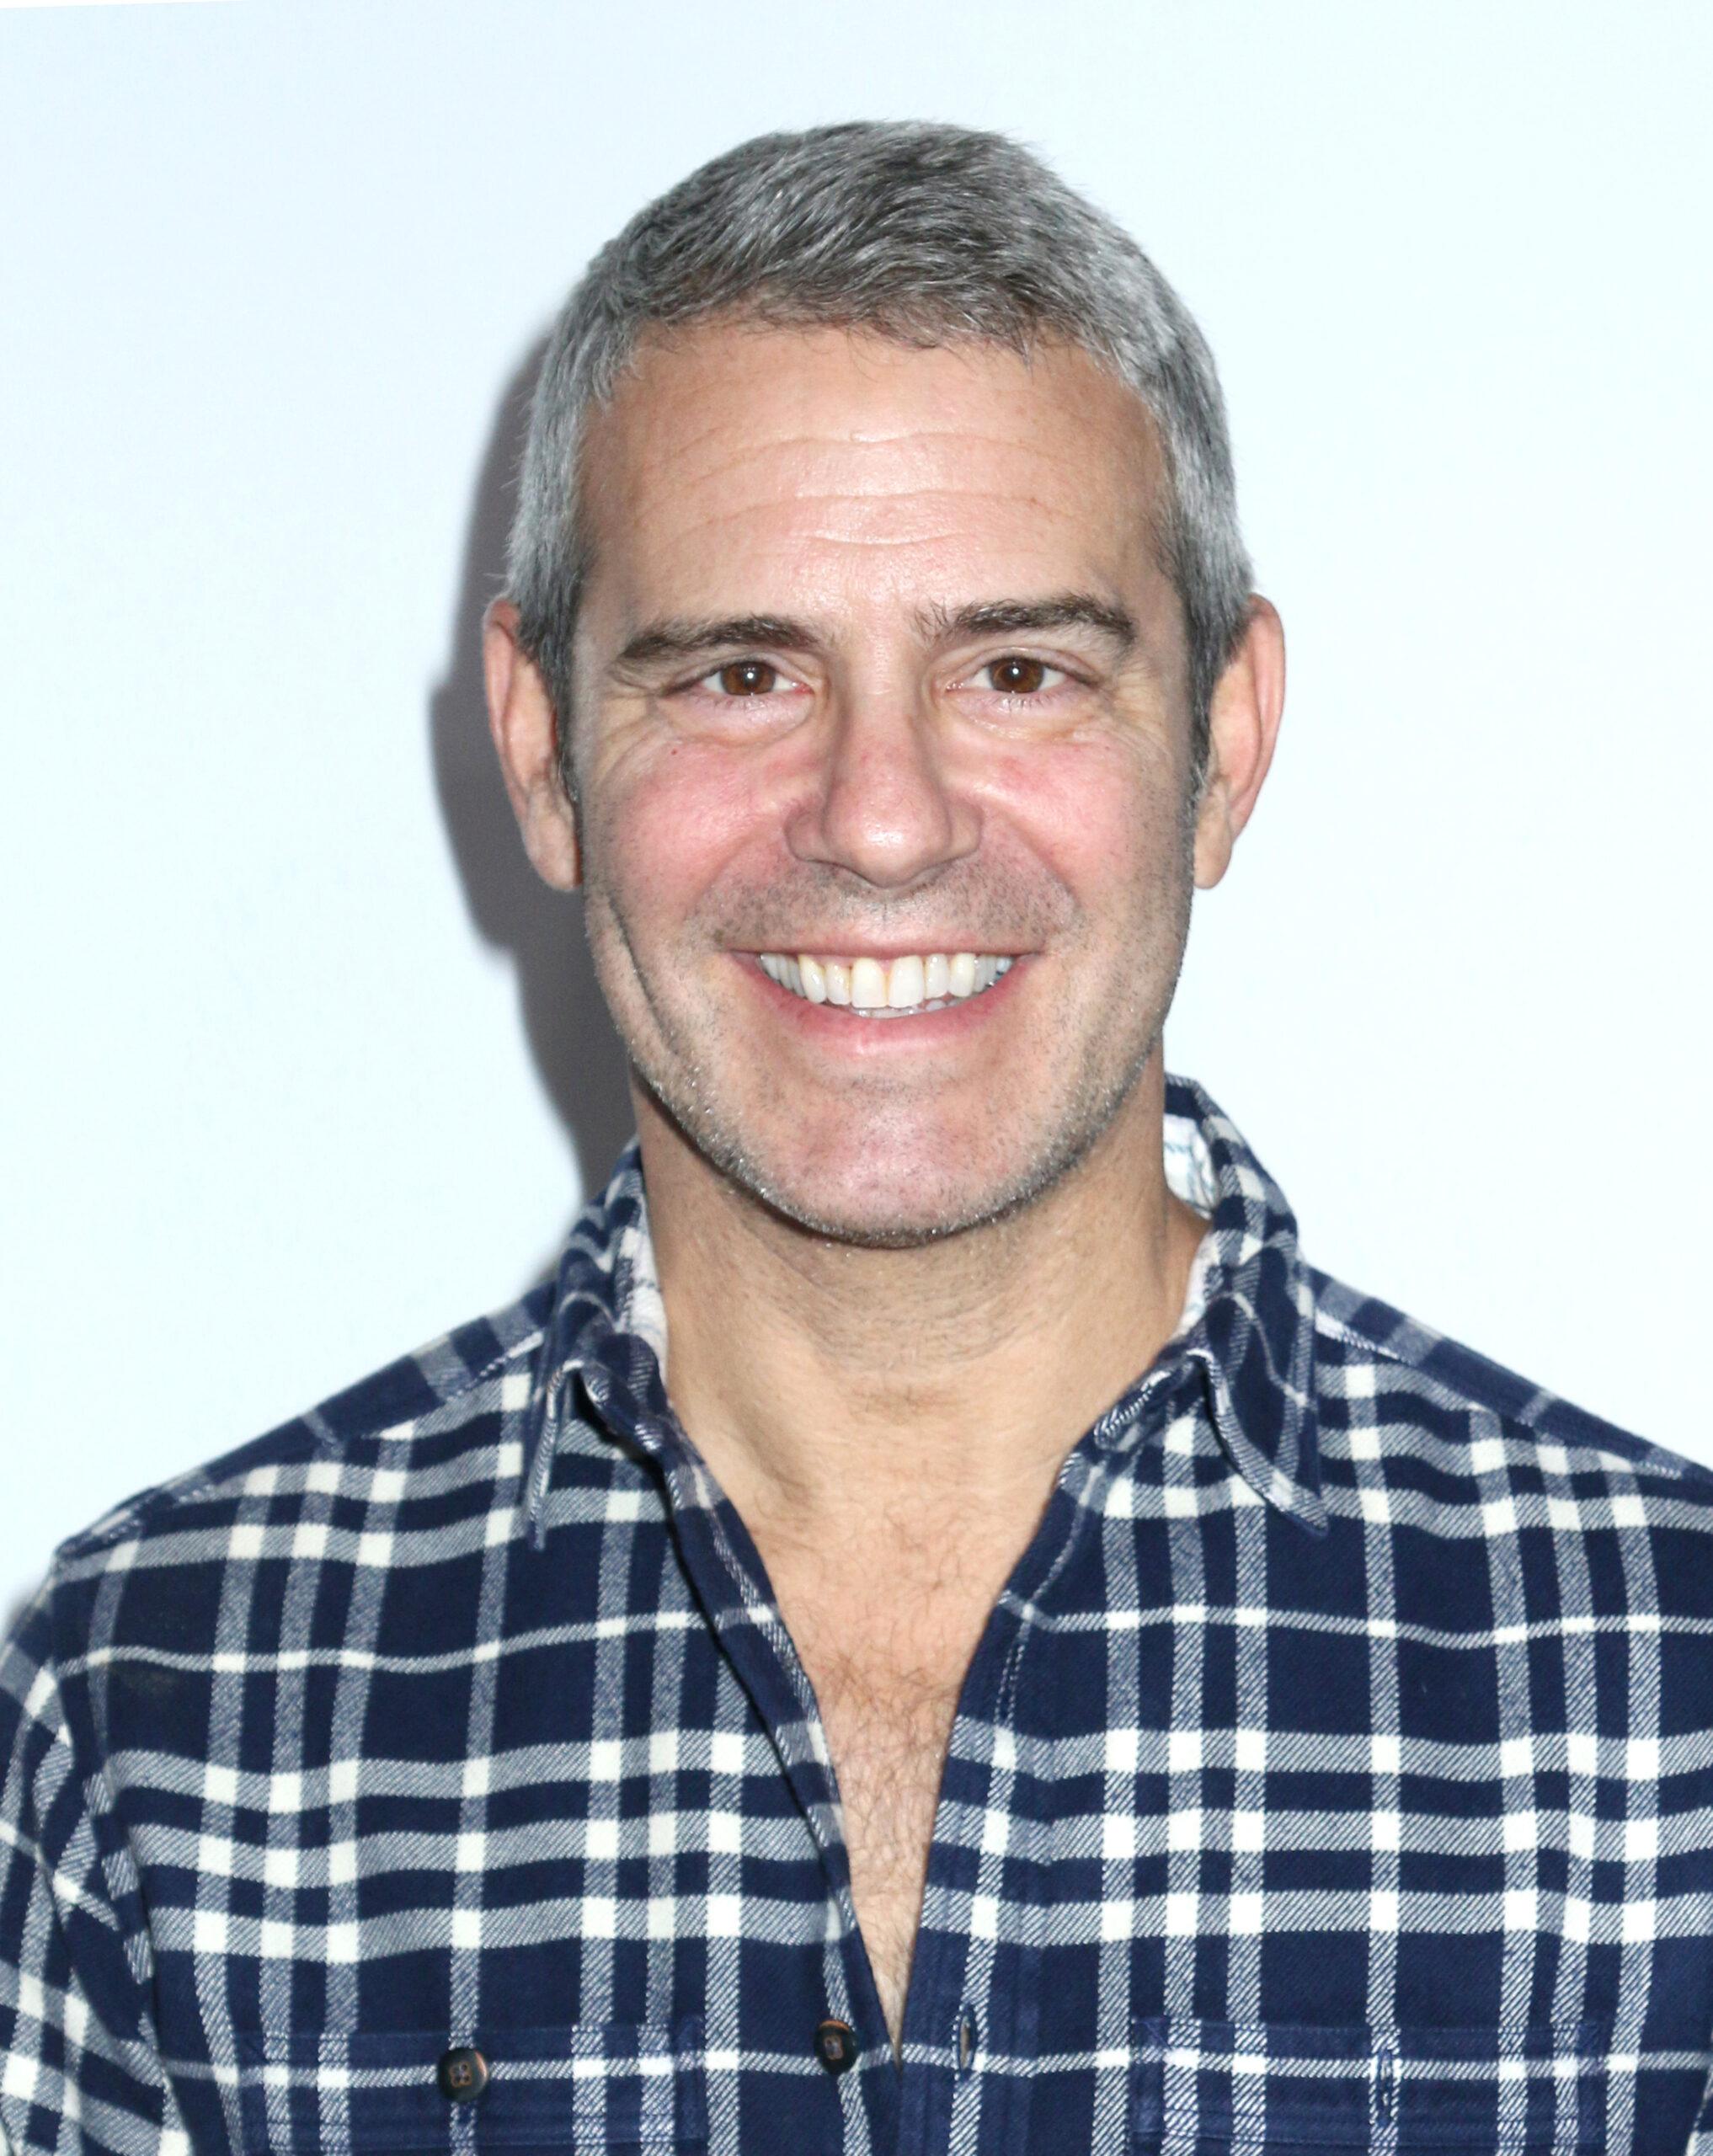 A photo showing Andy Cohen in a striped T-shirt.